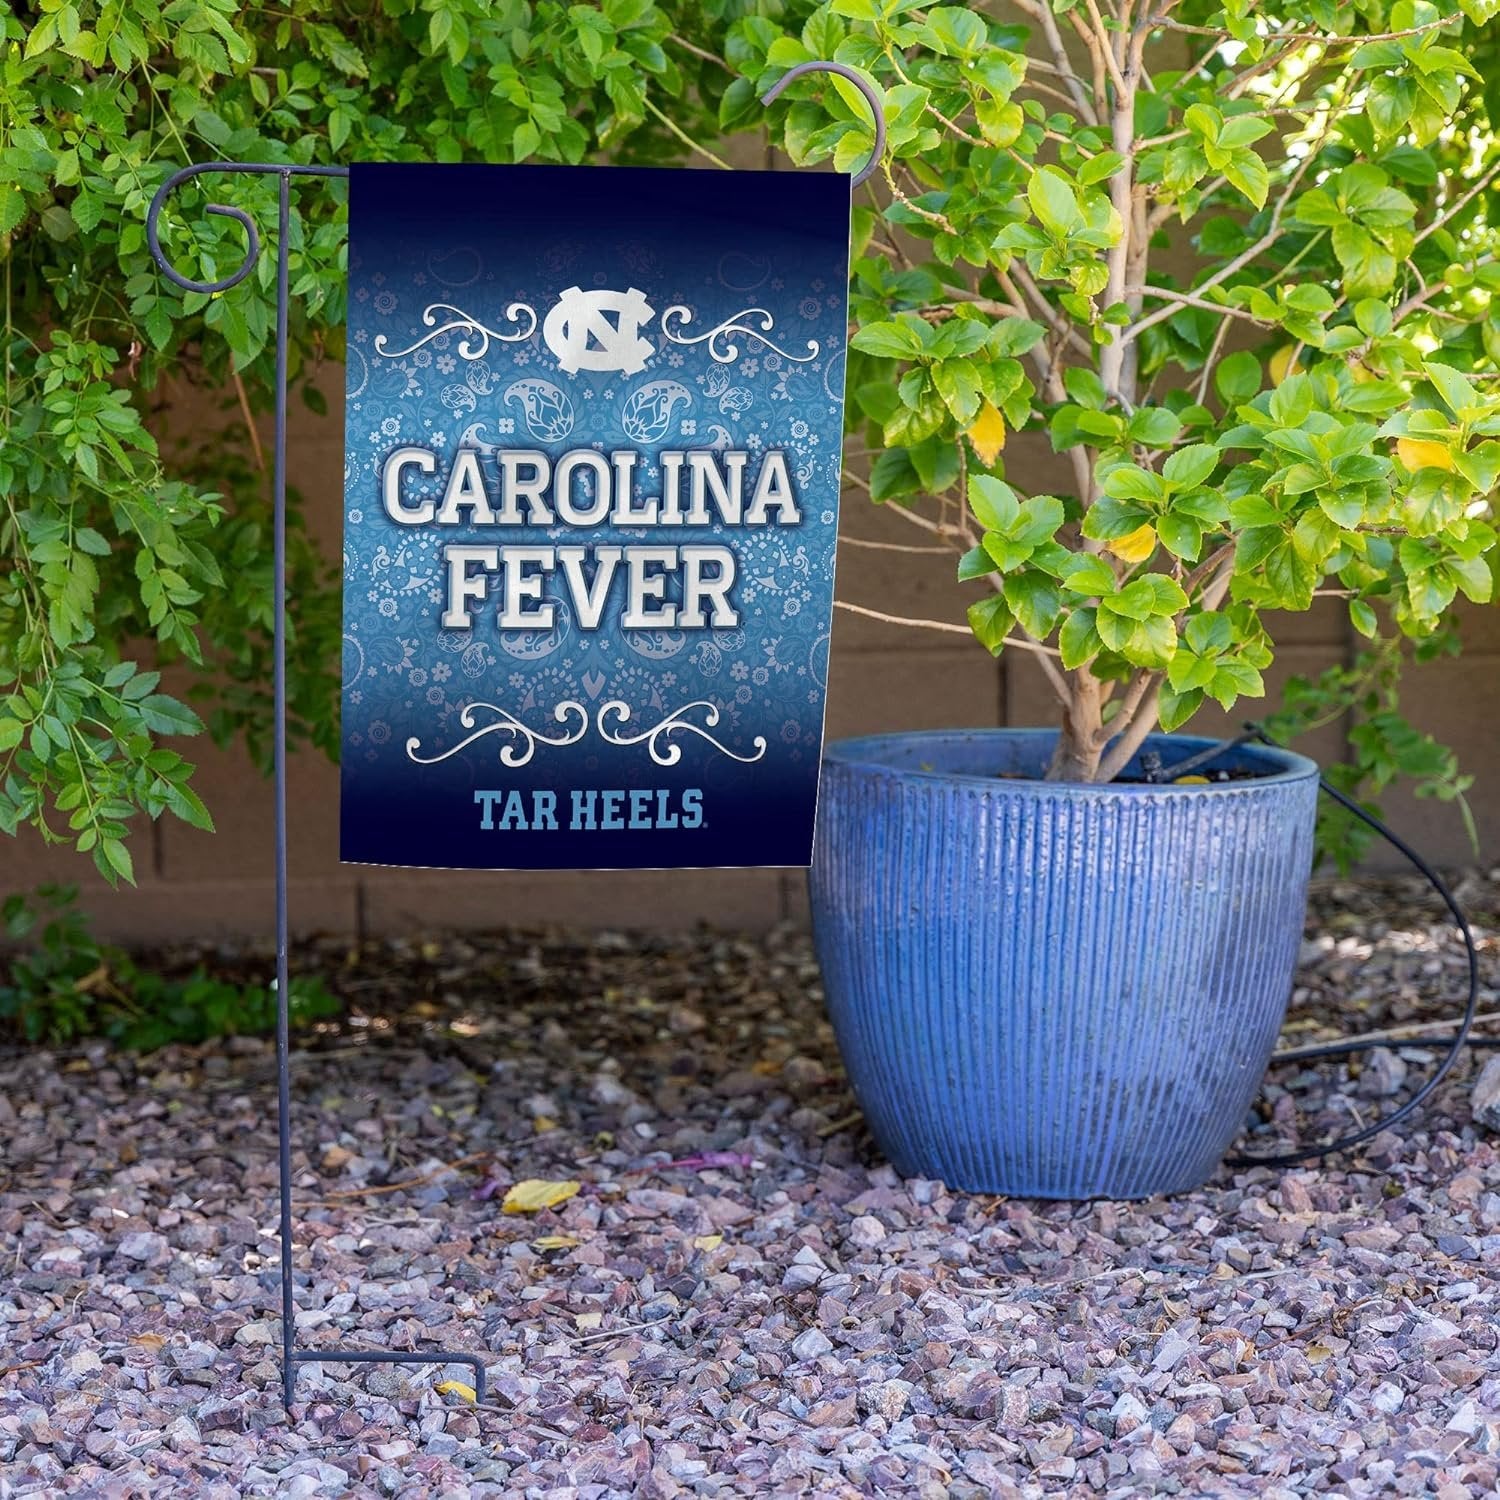 University of North Carolina Tar Heels Premium Double Sided Garden Flag Banner, 13x18 Inch, Display Pole Sold Separately